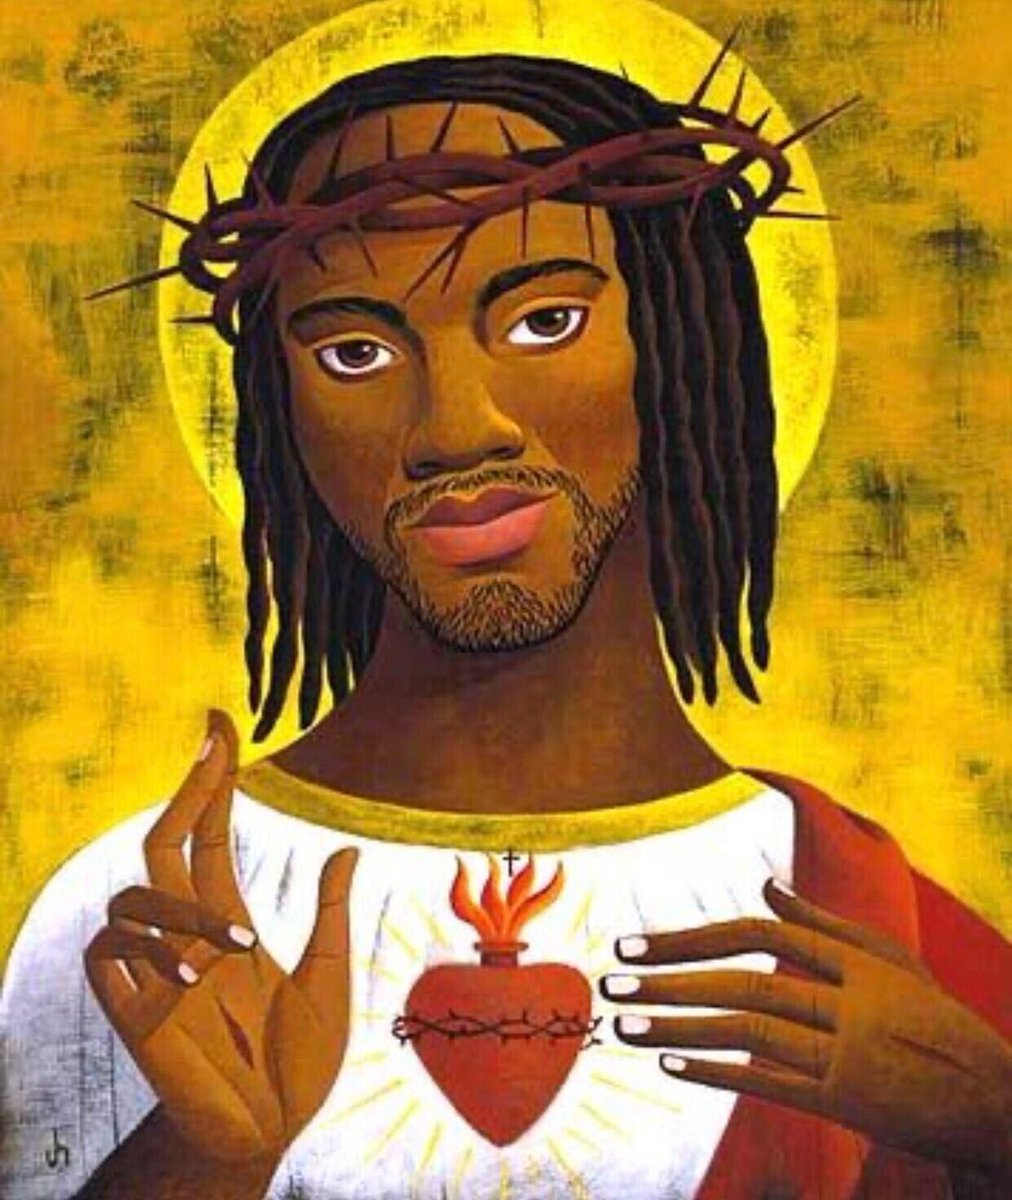 The Sacred Heart of Jesus excludes no one. If your 'Jesus' excludes, marginalizes, dehumanizes, or demonizes others, it is not the Christ of the Gospels you are following. ✌🏽️🌀❤️🌿